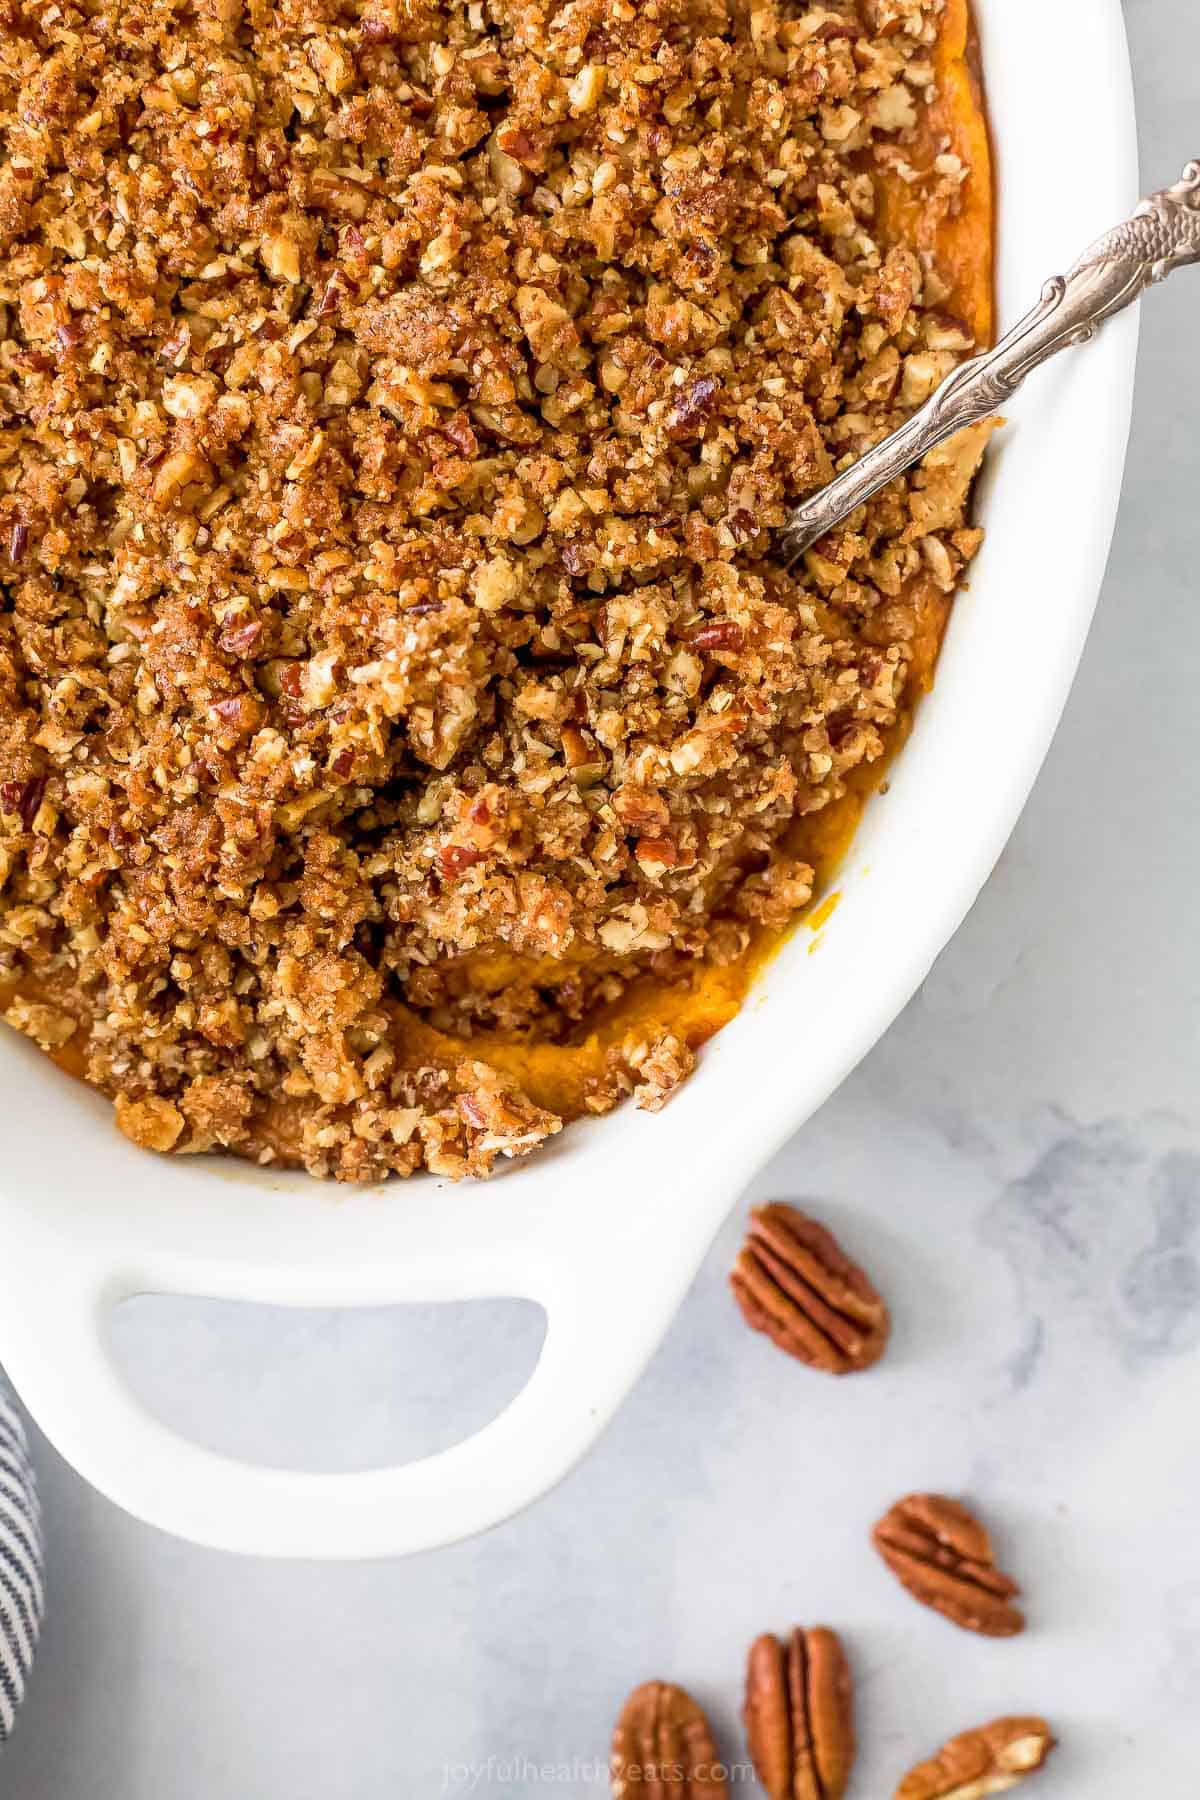 A sweet potato casserole with a crunchy pecan topping on a marble countertop